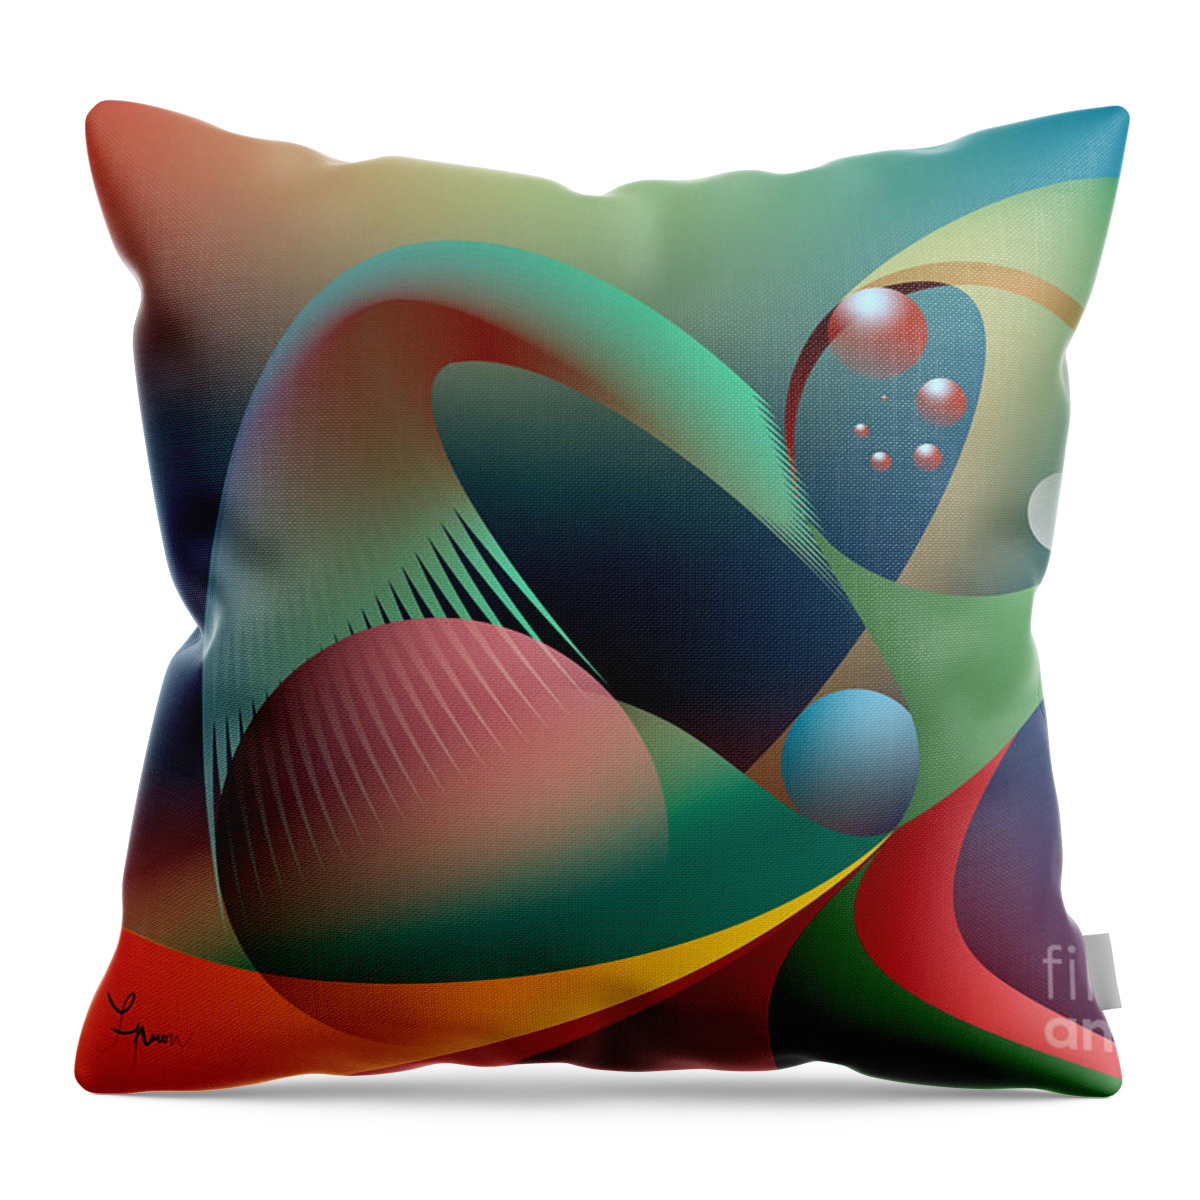 Cells Throw Pillow featuring the digital art Cells Path by Leo Symon